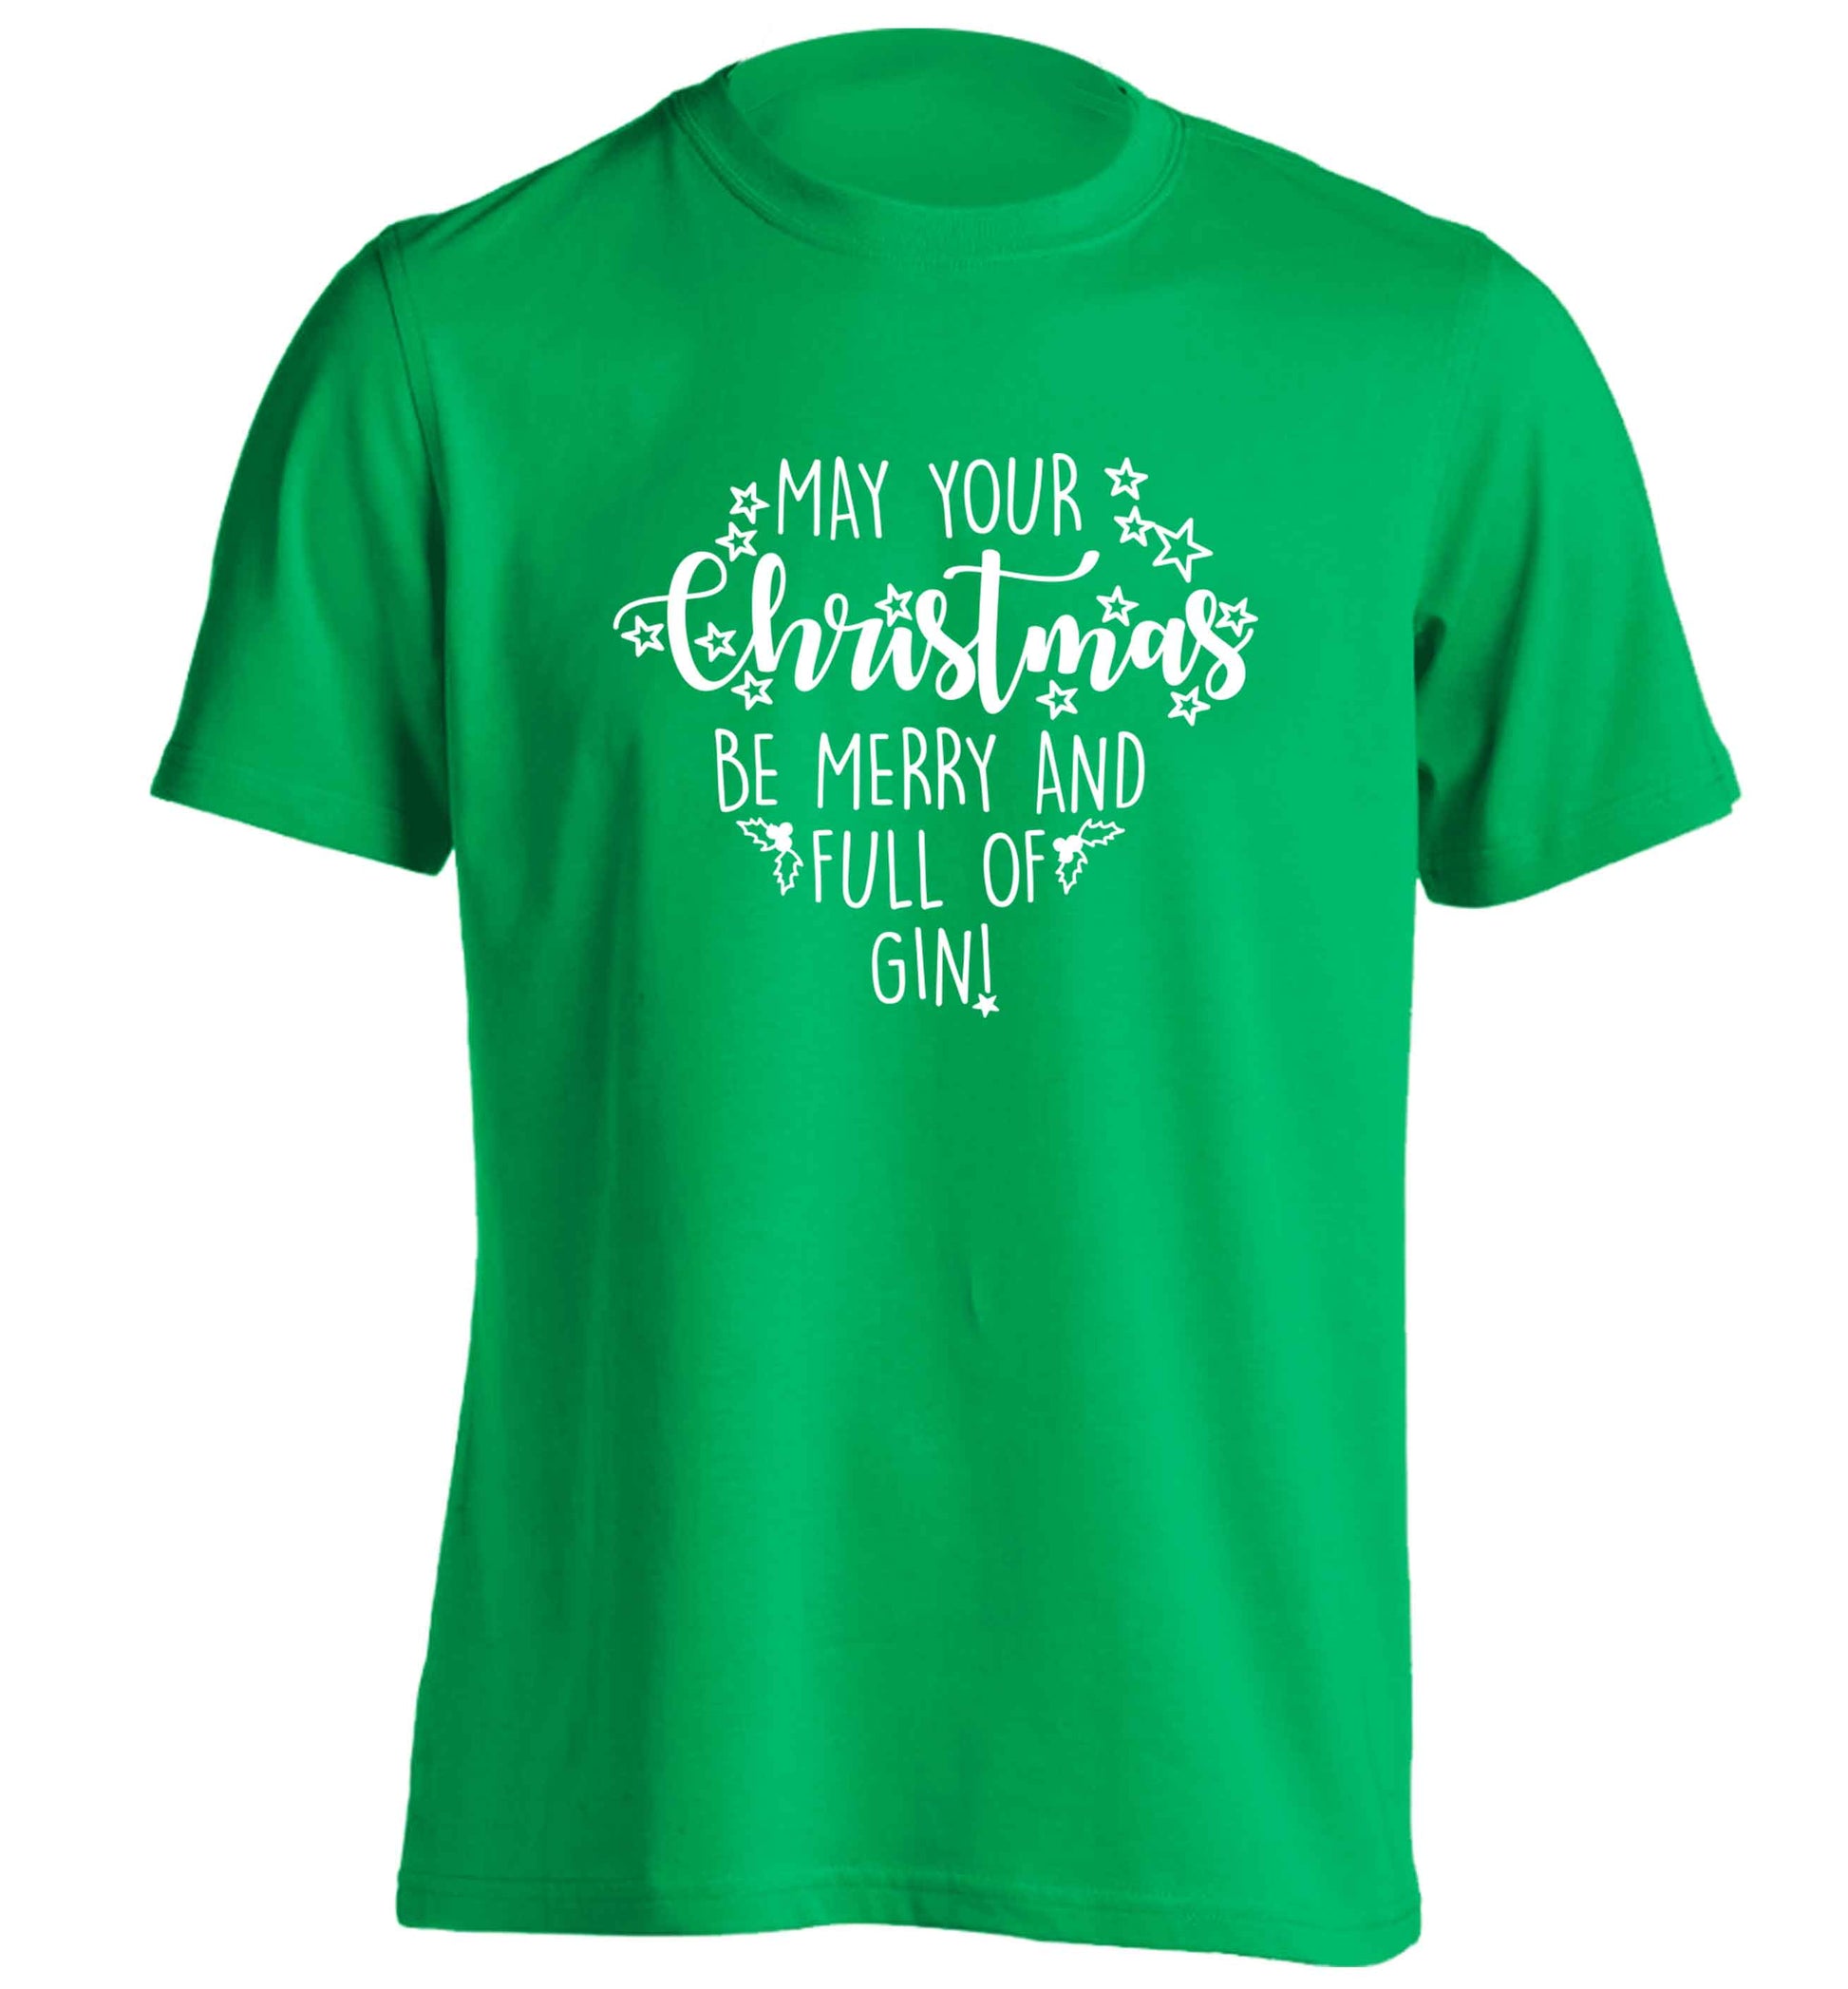 May your Christmas be merry and full of gin adults unisex green Tshirt 2XL